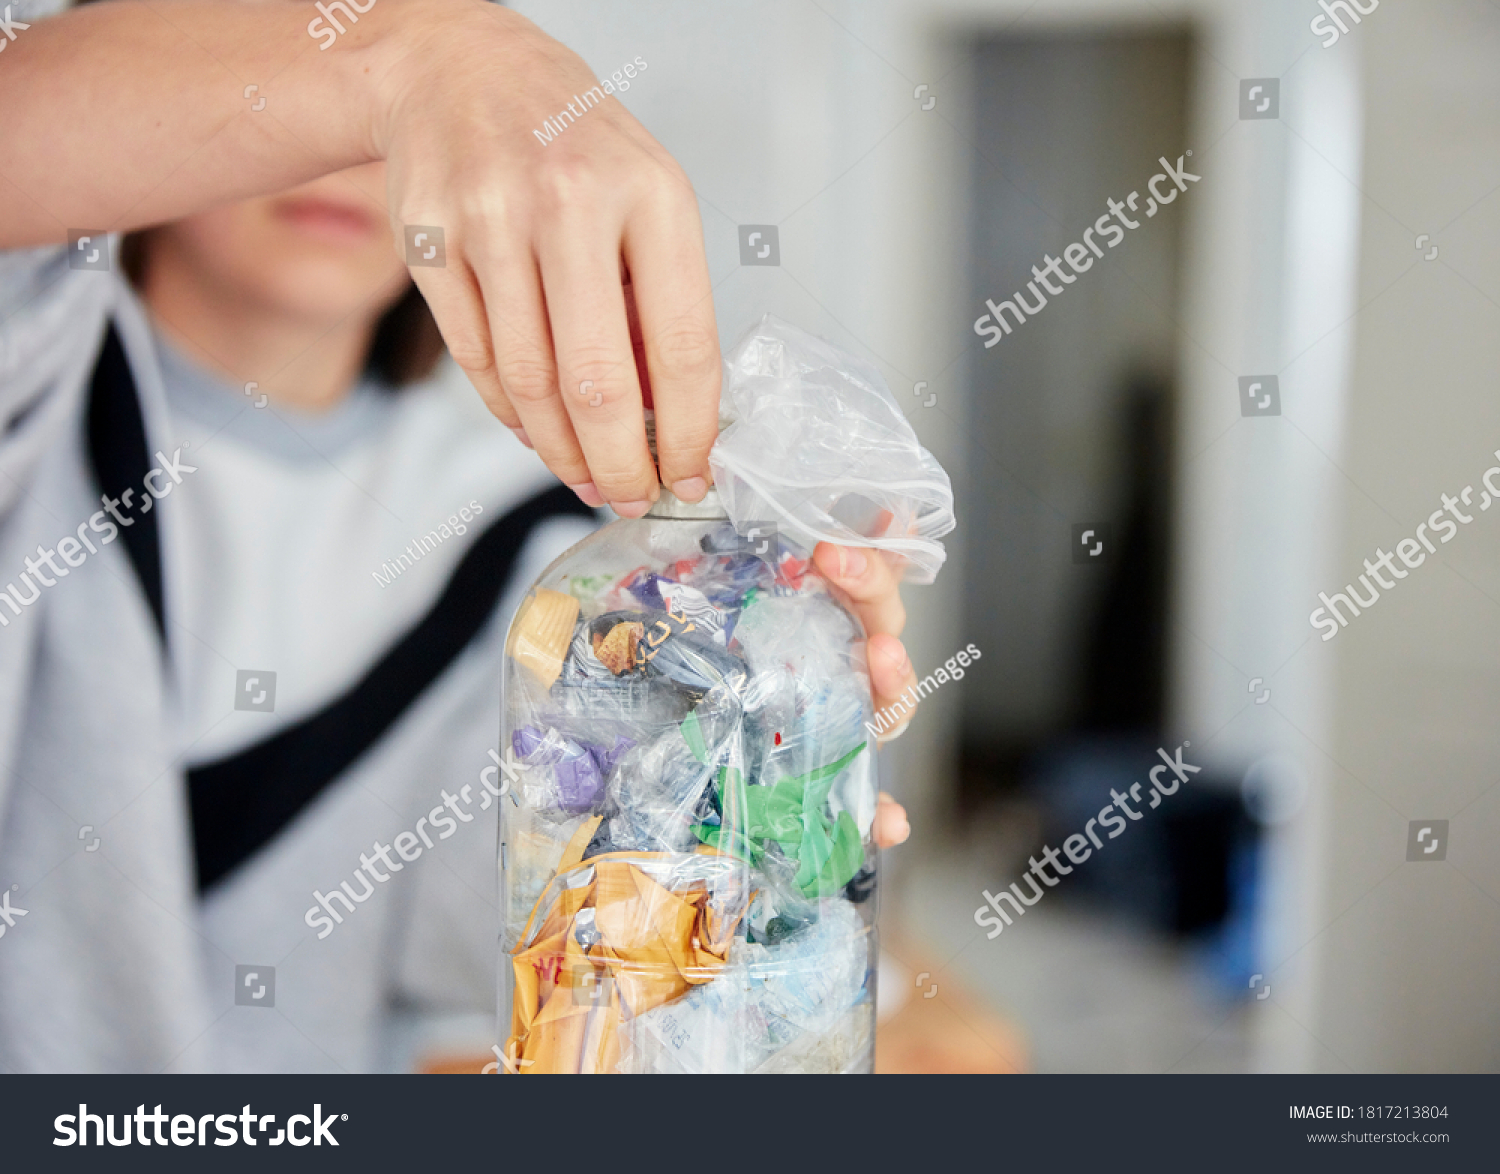 Woman stuffing soft waste plastics into a plastic bottle to make an ecobrick #1817213804